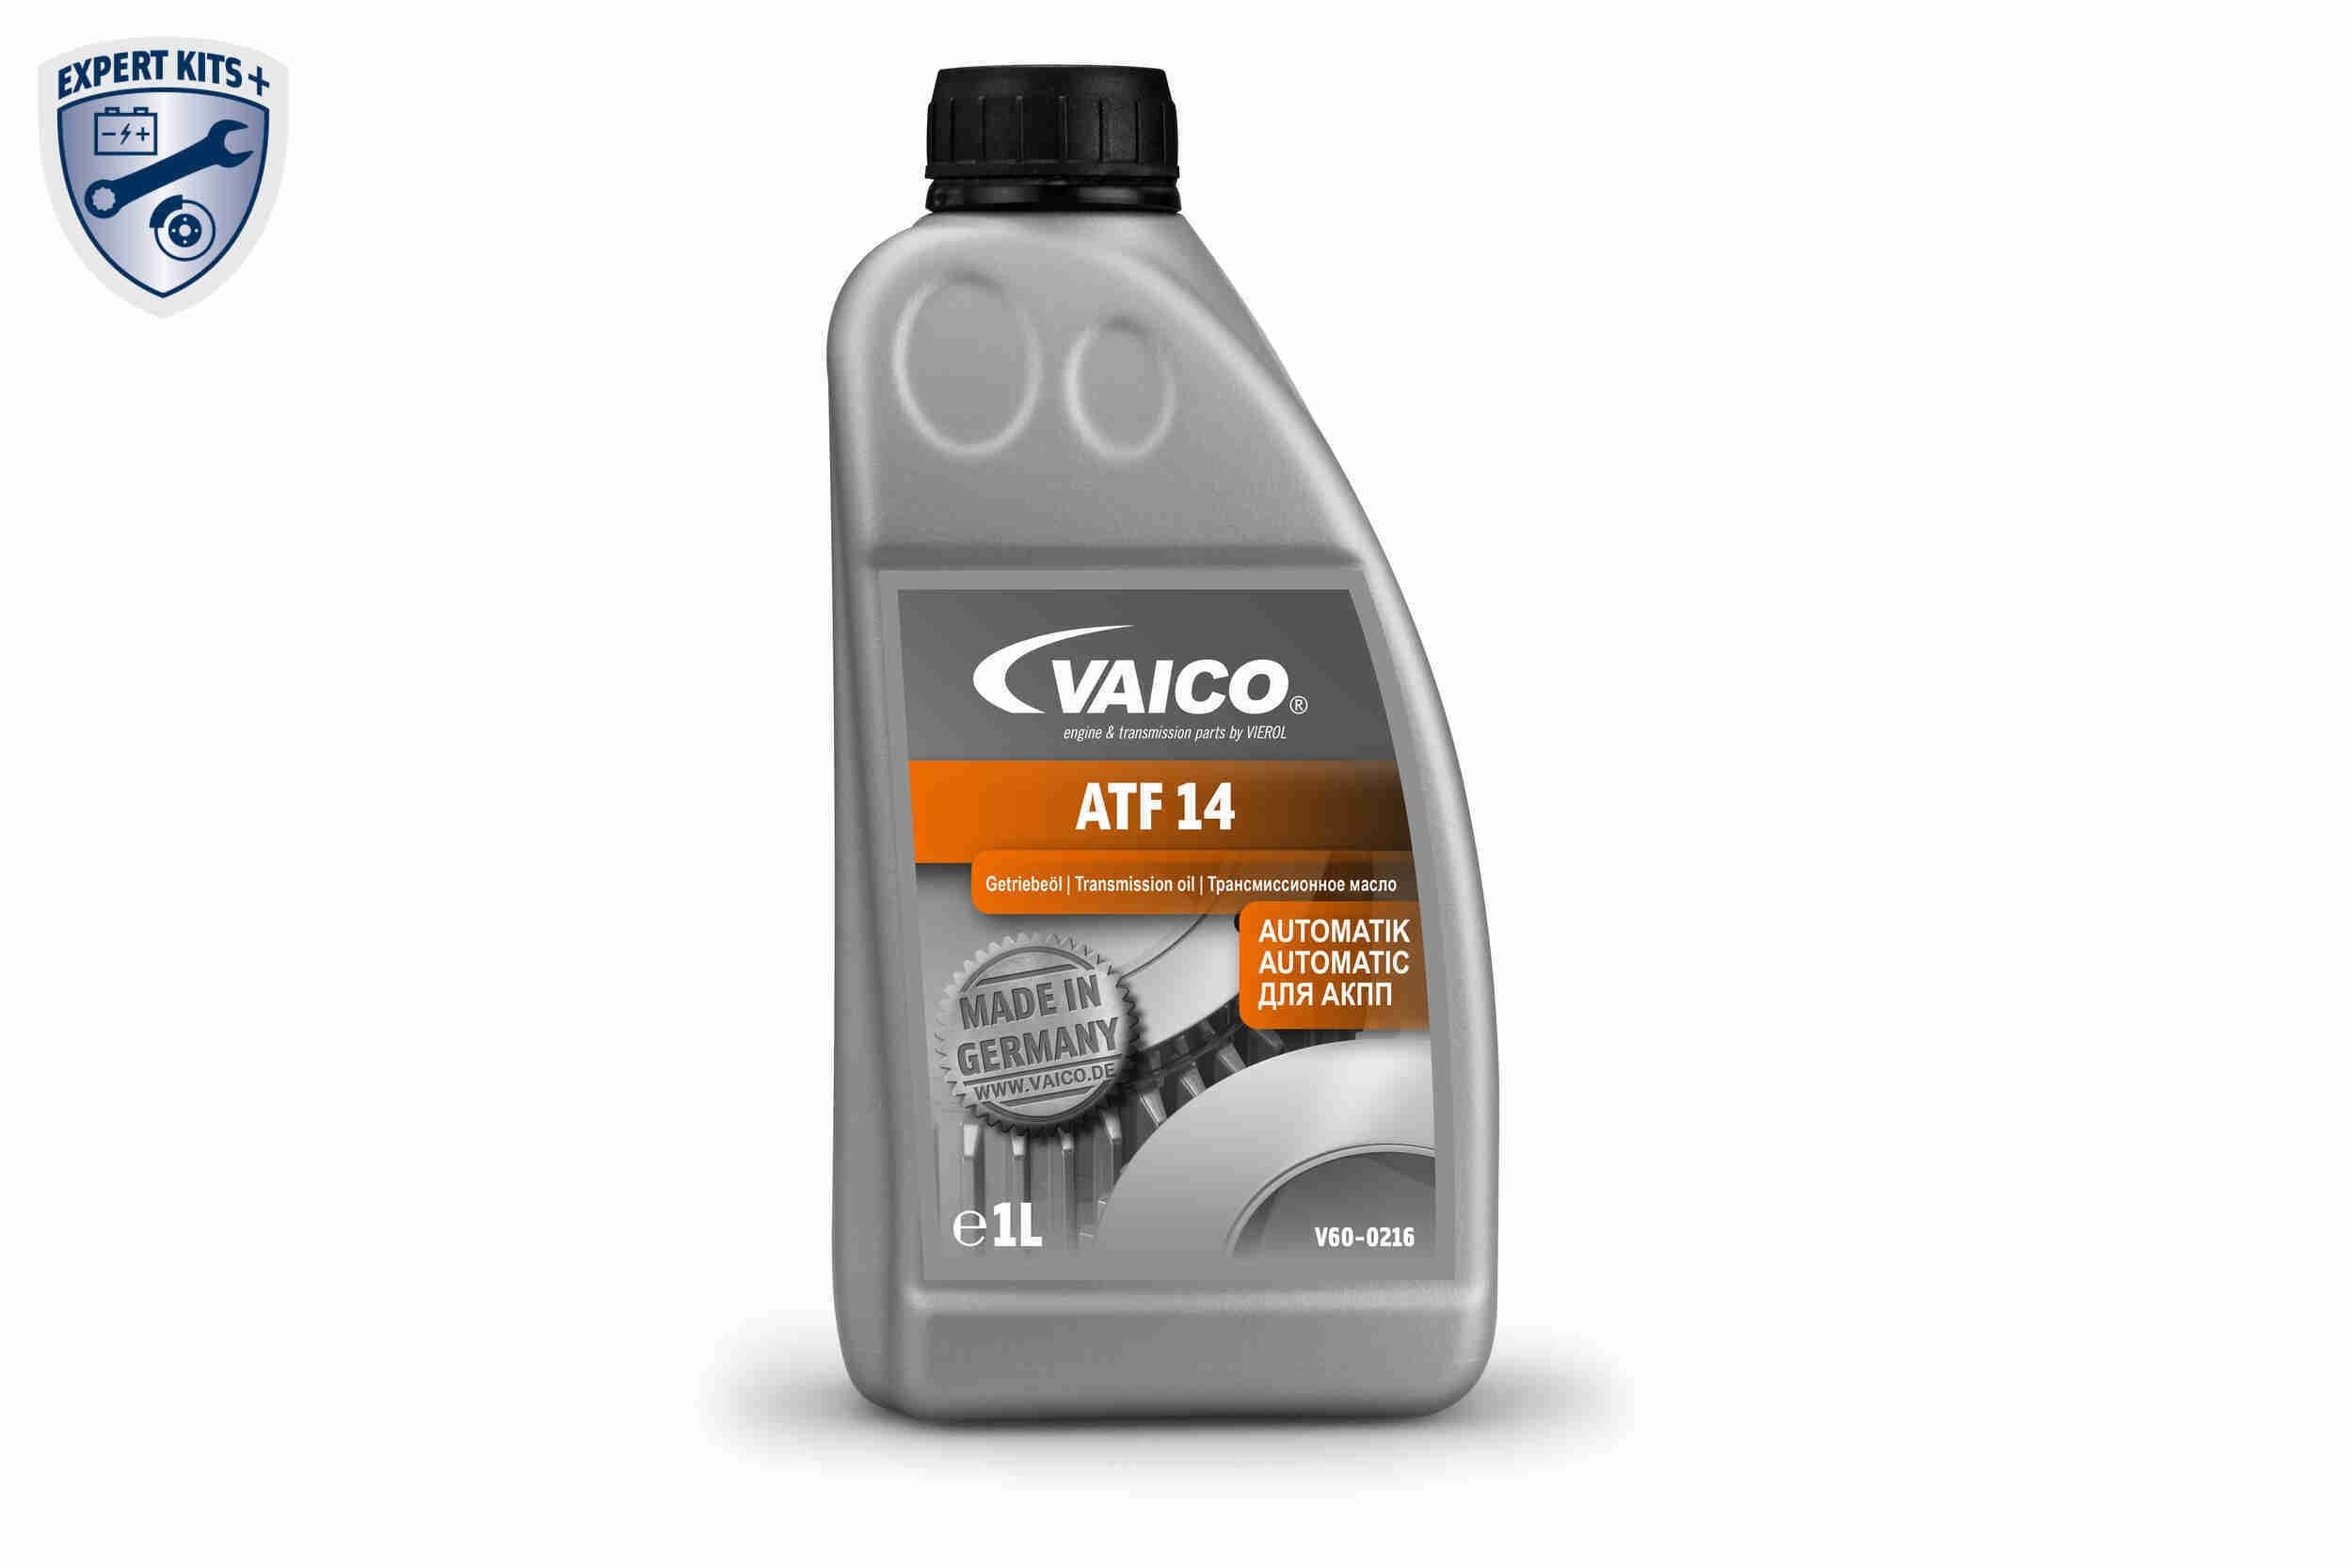 Propshafts and differentials parts - Automatic transmission fluid VAICO V60-0216